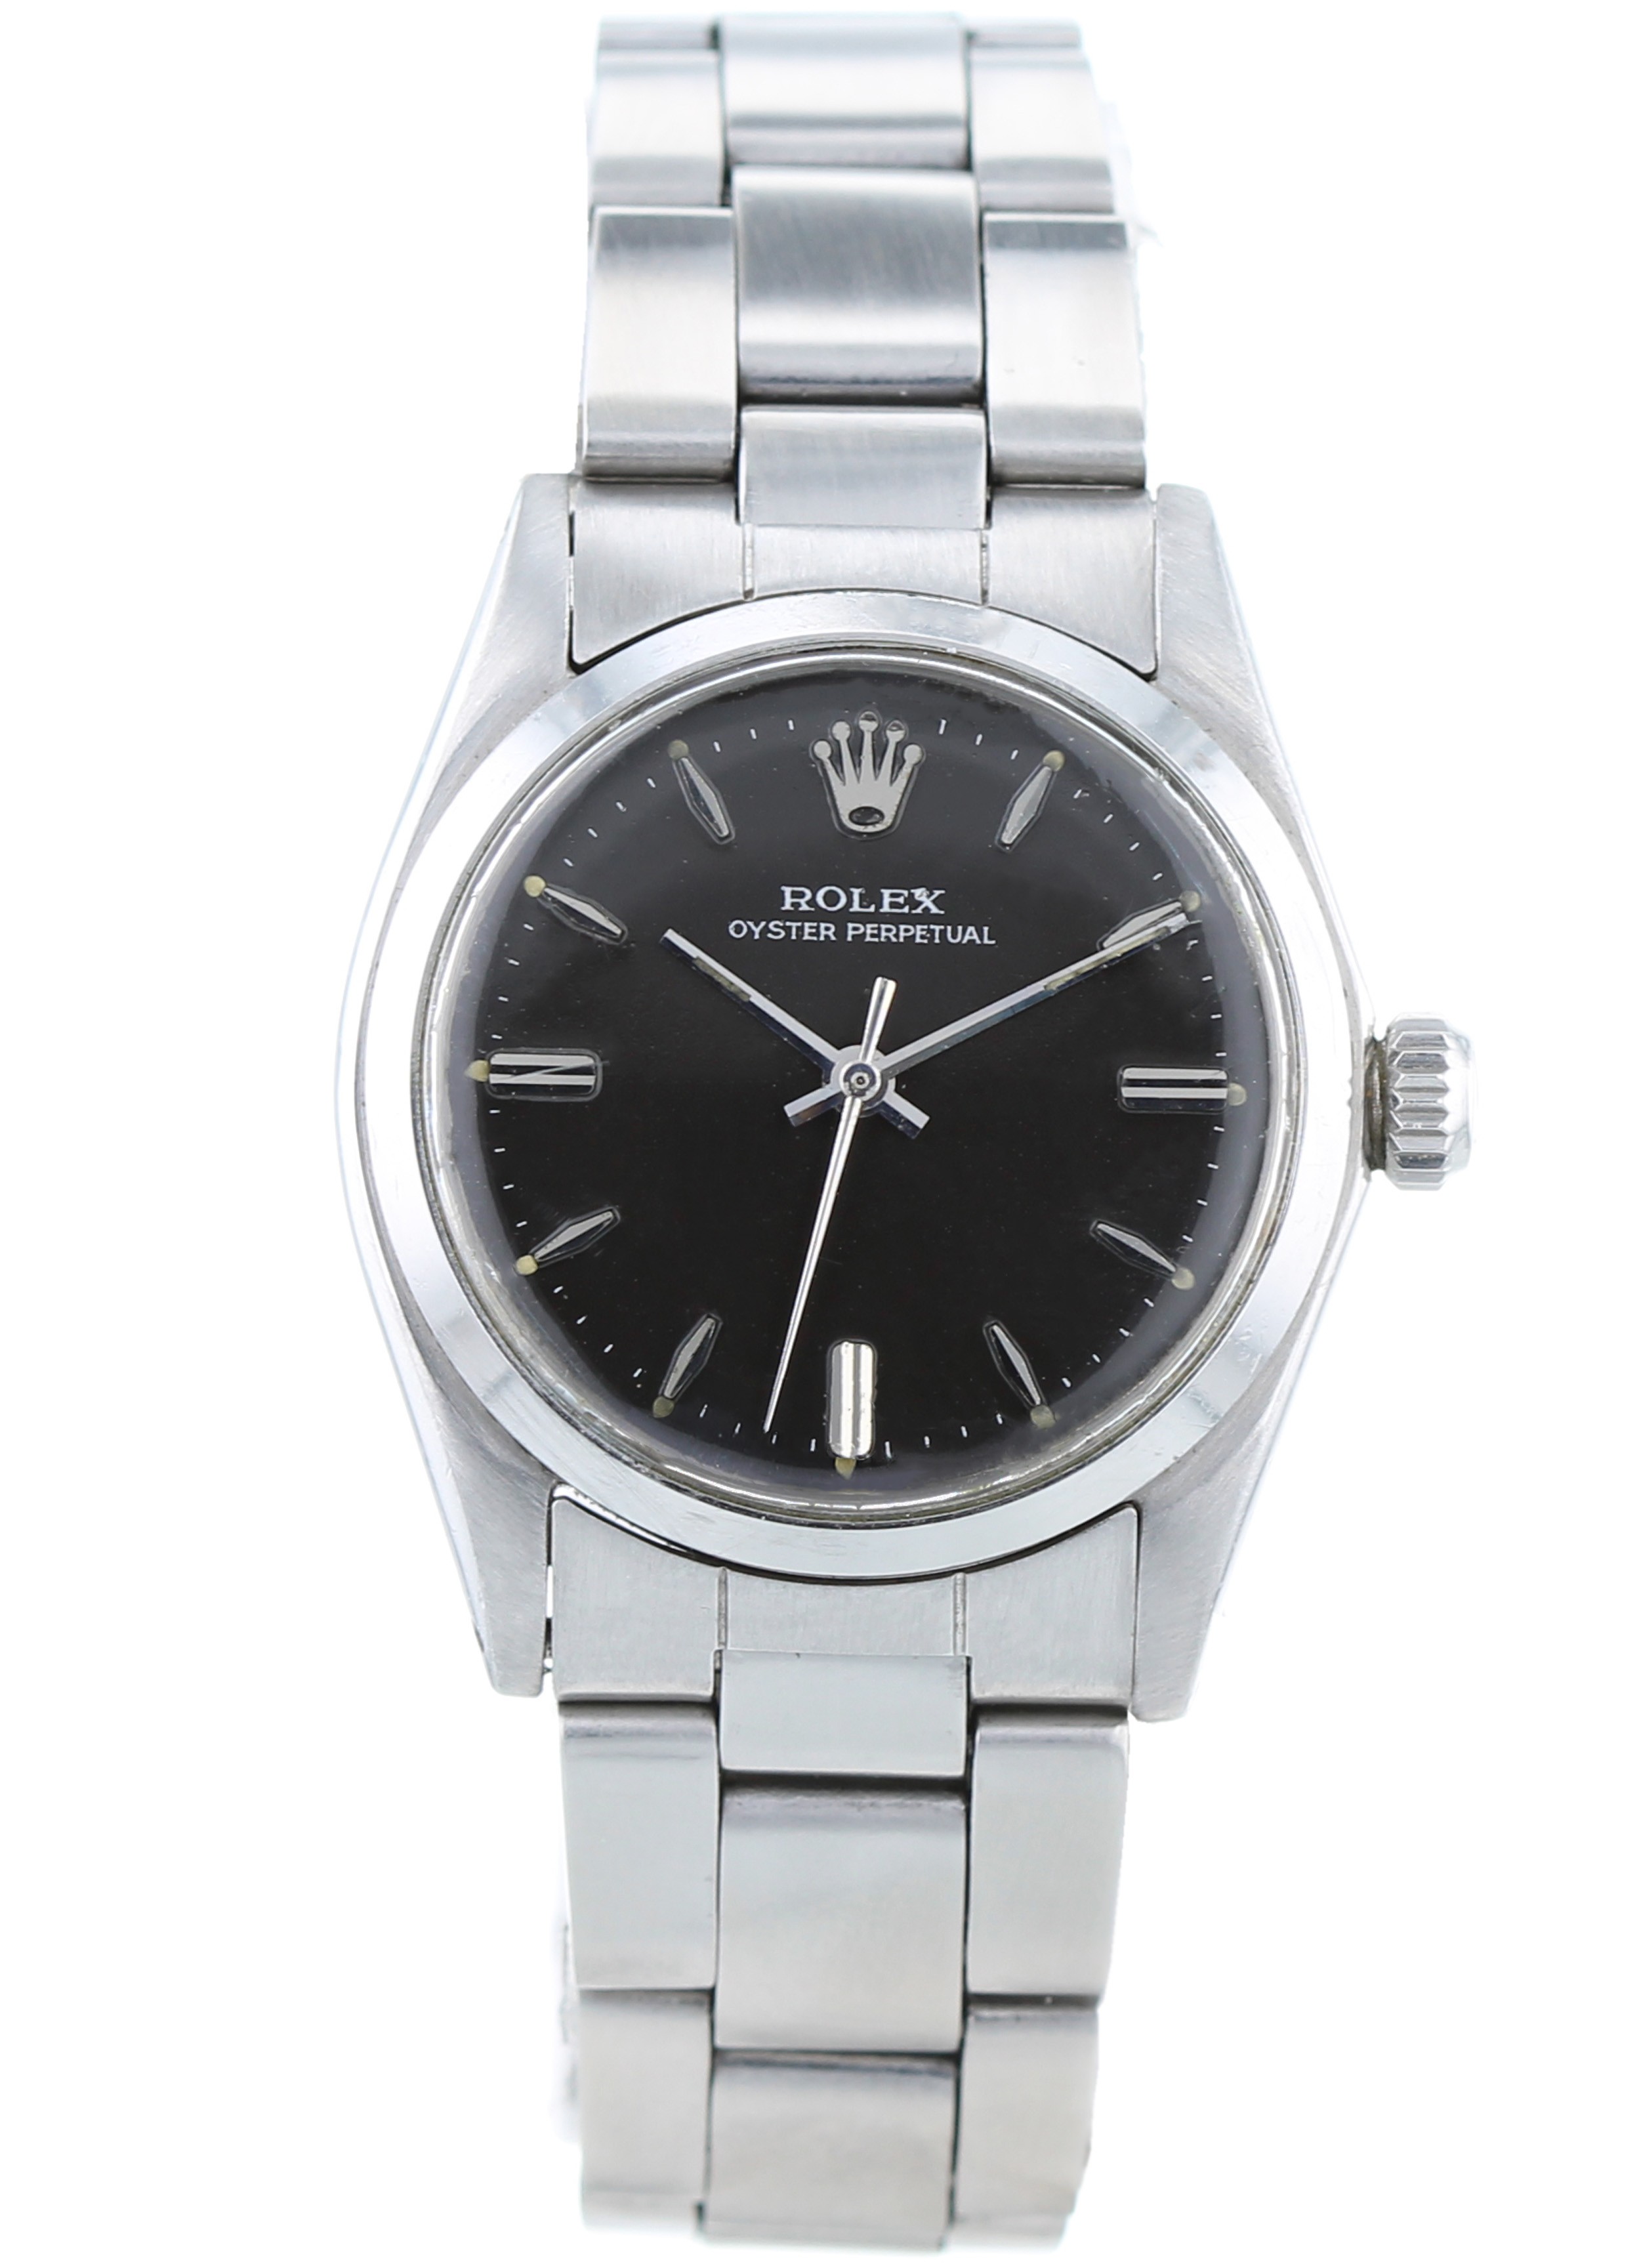 ROLEX Oyster Perpetual 6549 Automatic 